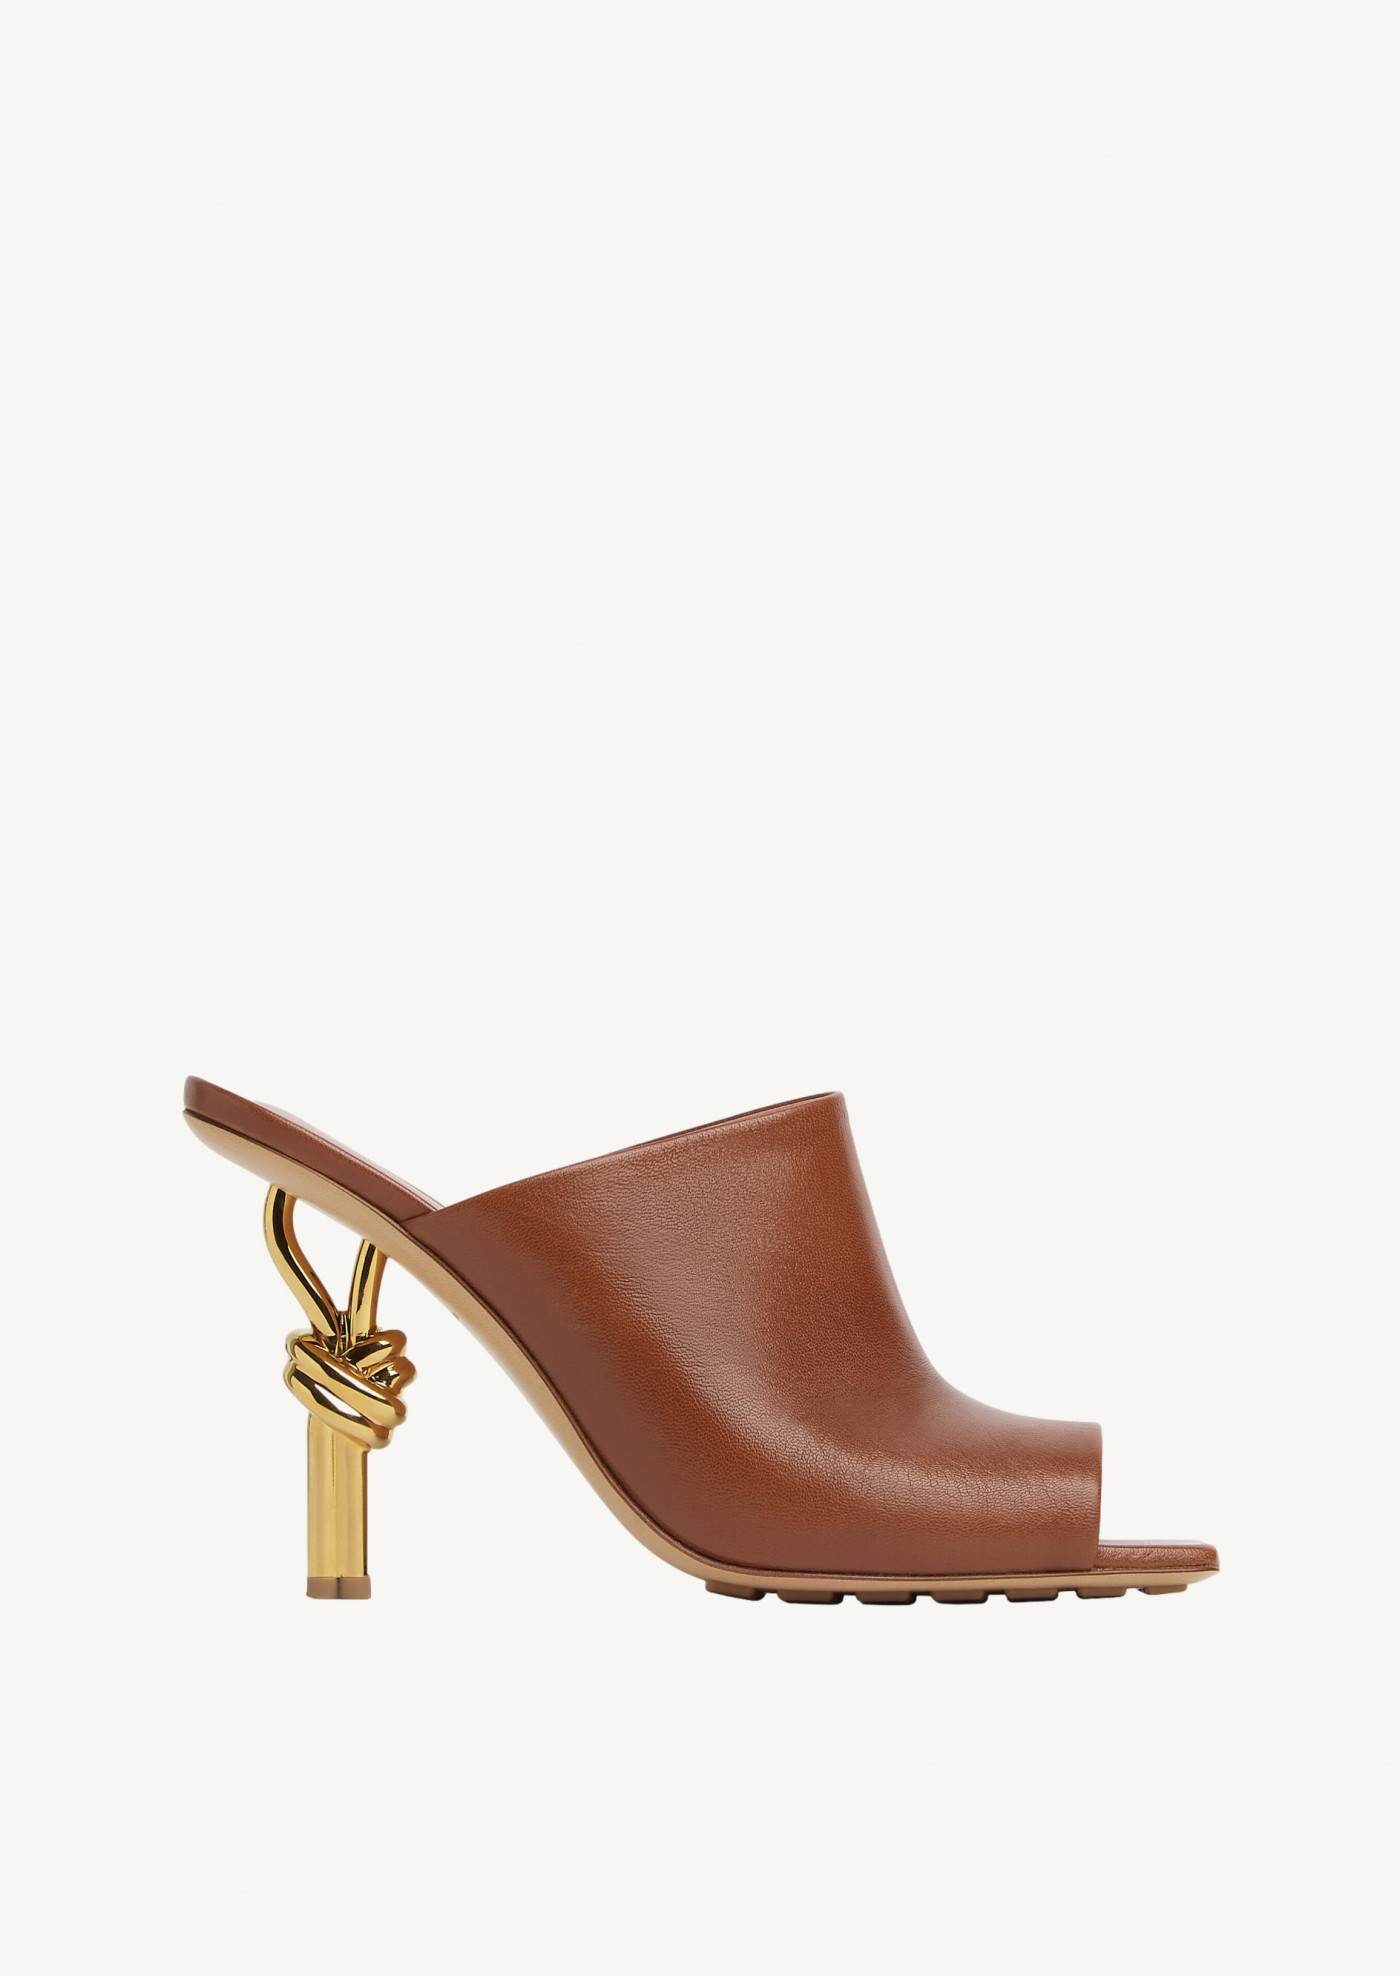 Mules Knot marrons